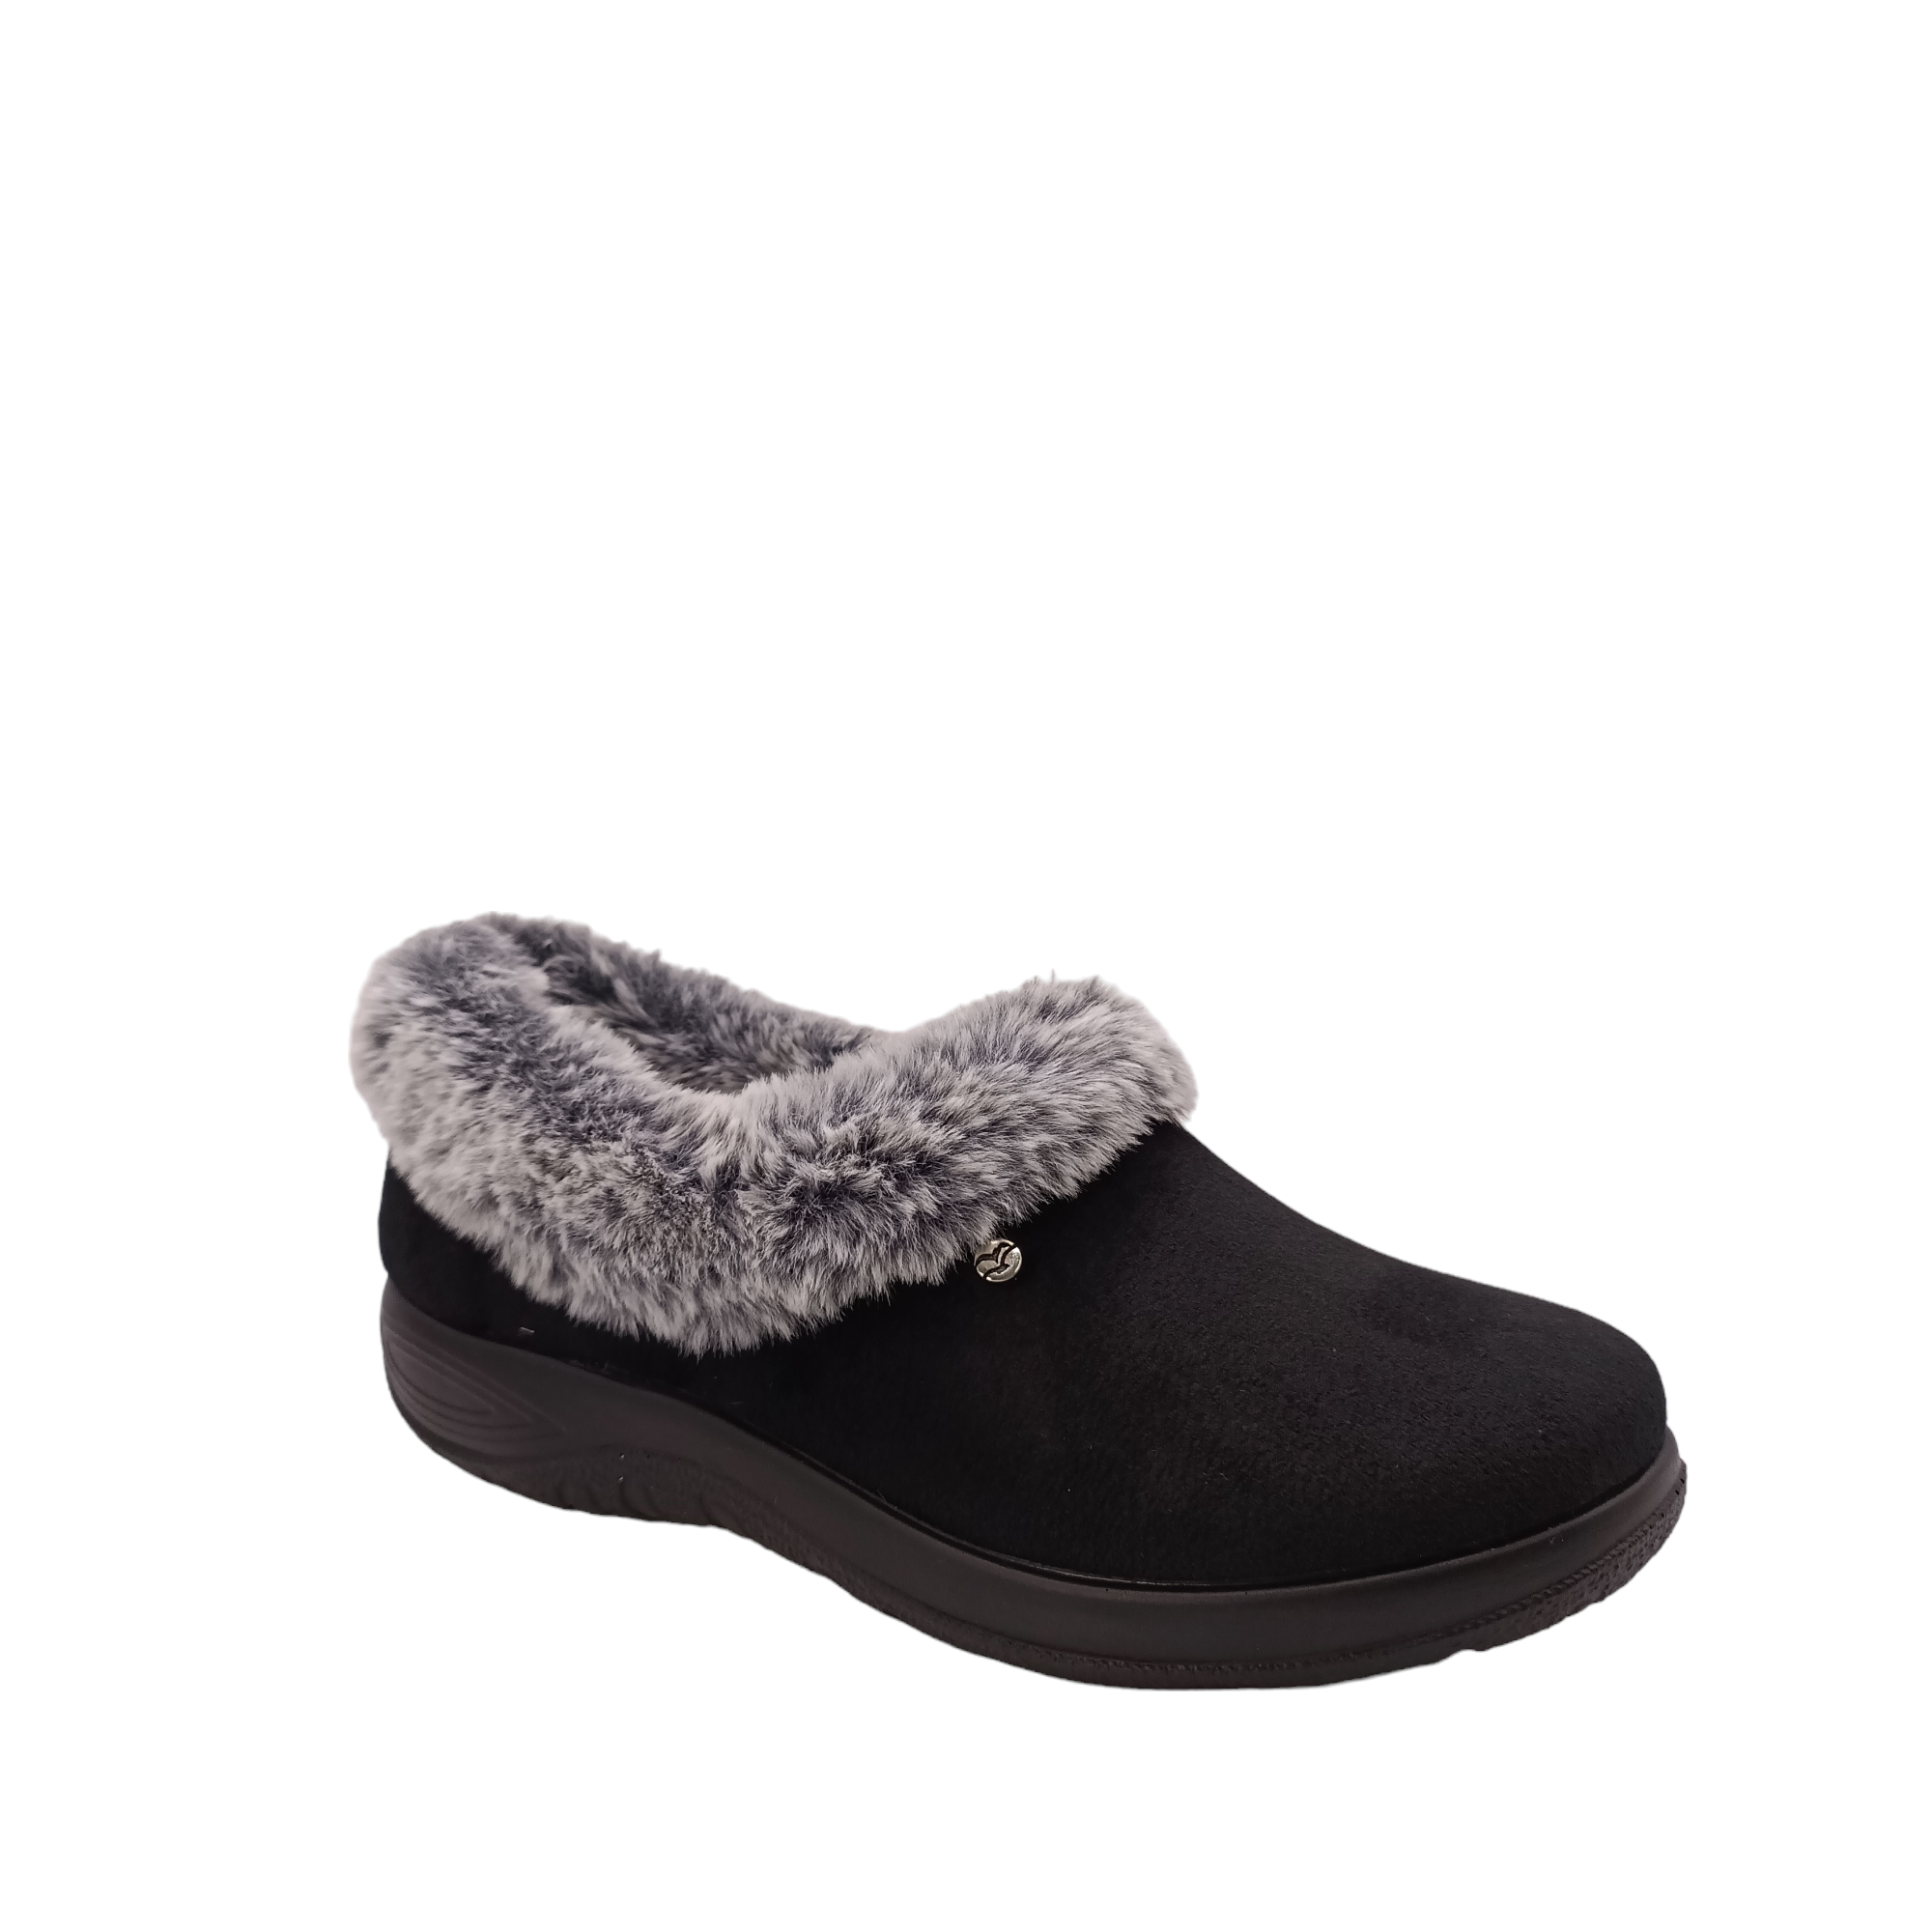 Shop Pippa Fly Flot - with shoe&me - from Fly Flot - Slippers - Slipper, Winter